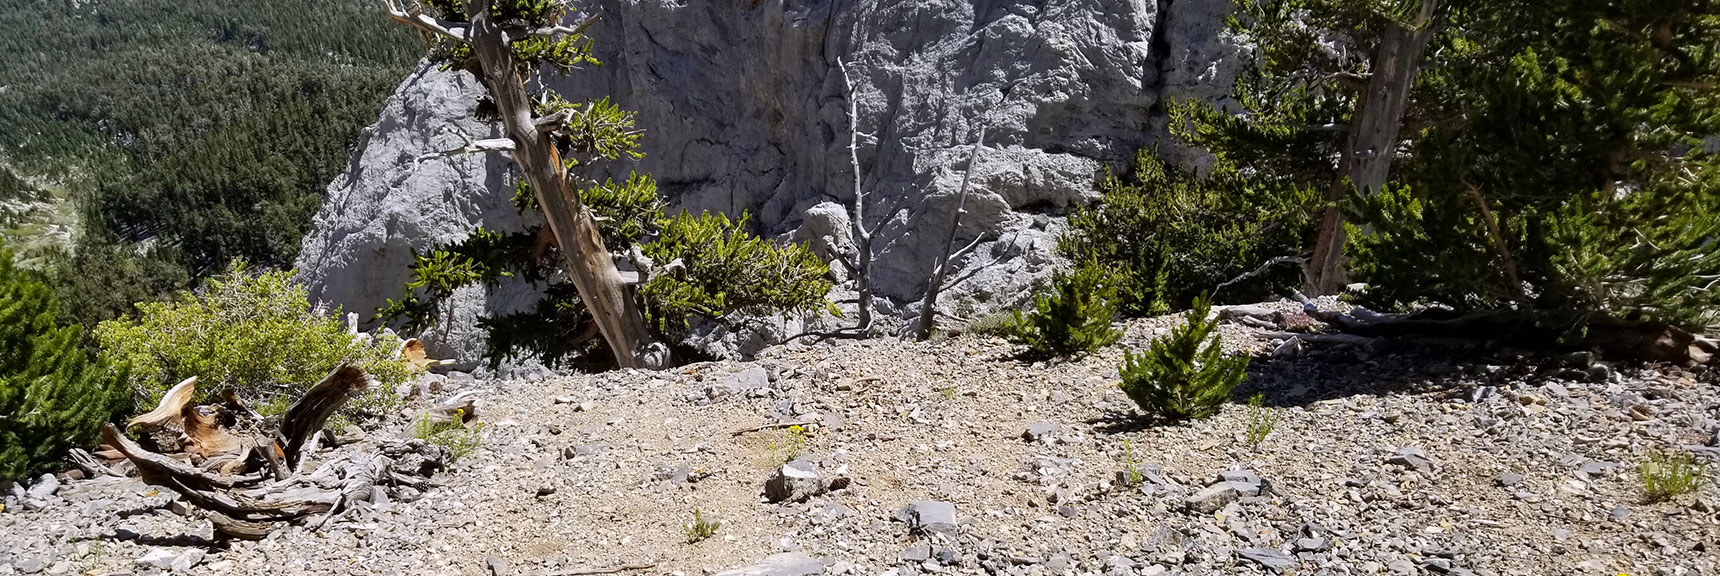 Looking Back at a 10ft Vertical Cliff Just Climbed Exposed to a Hundred Foot Drop in Mt. Charleston Wilderness, Nevada